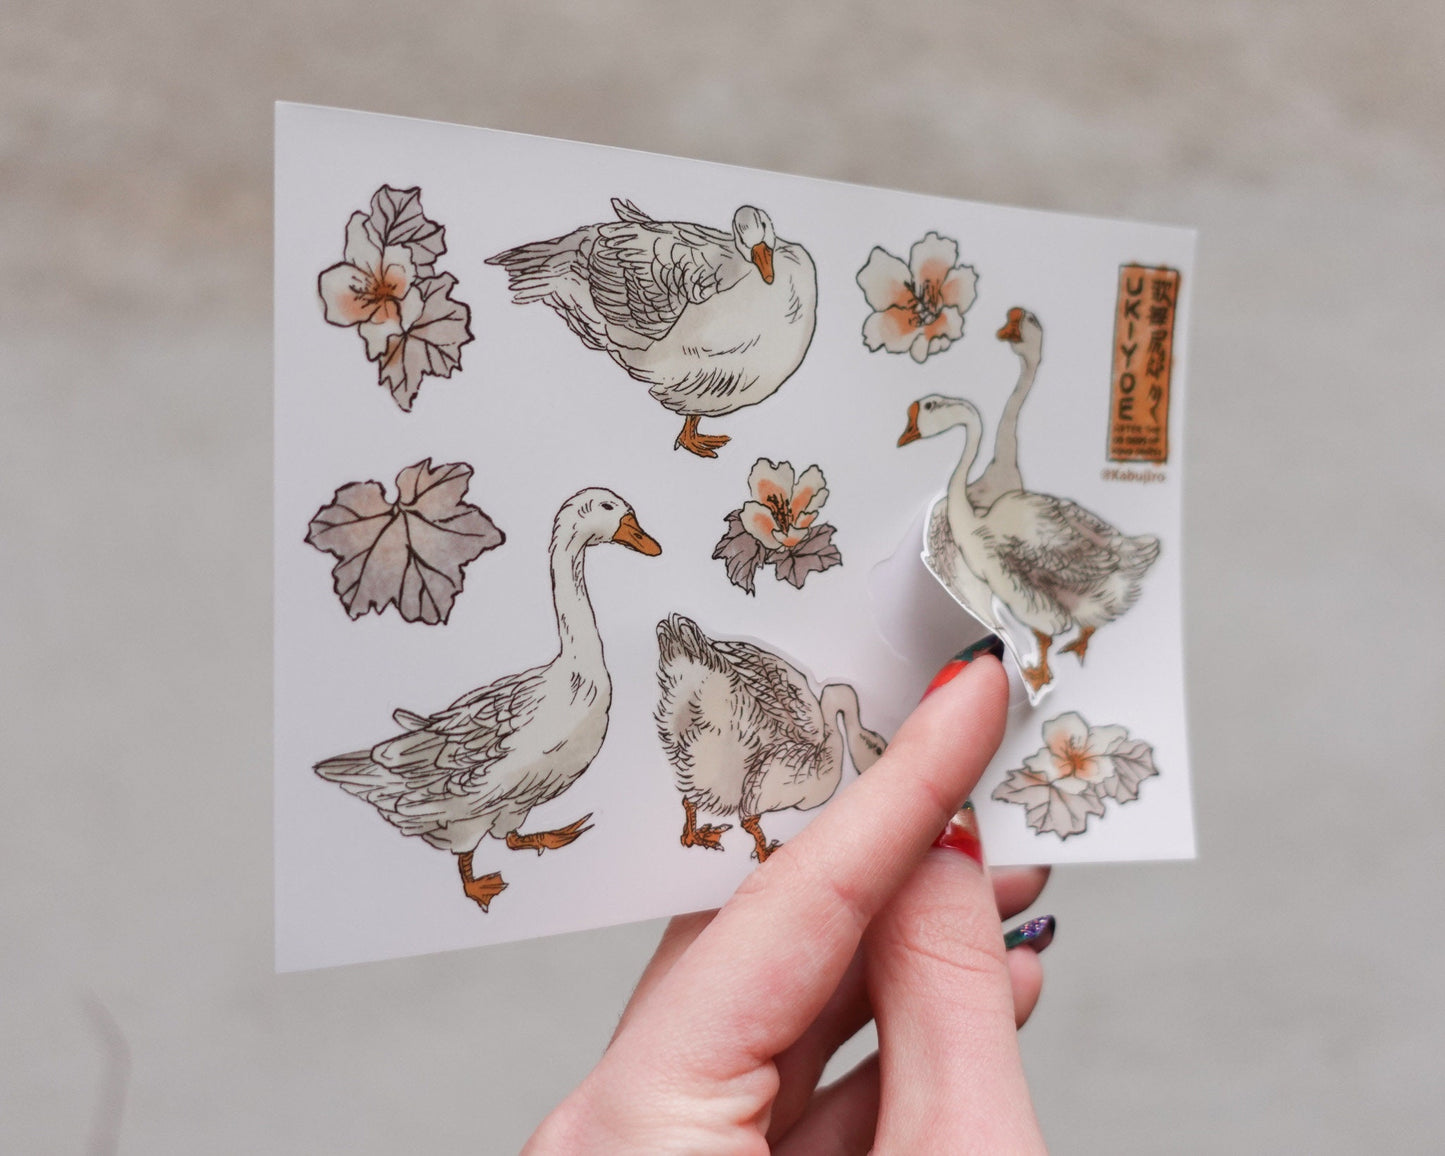 Geese and Flowers – Stickersheet with 9 Japanese Stickers inspired by Kono Bairei Ukiyo-e